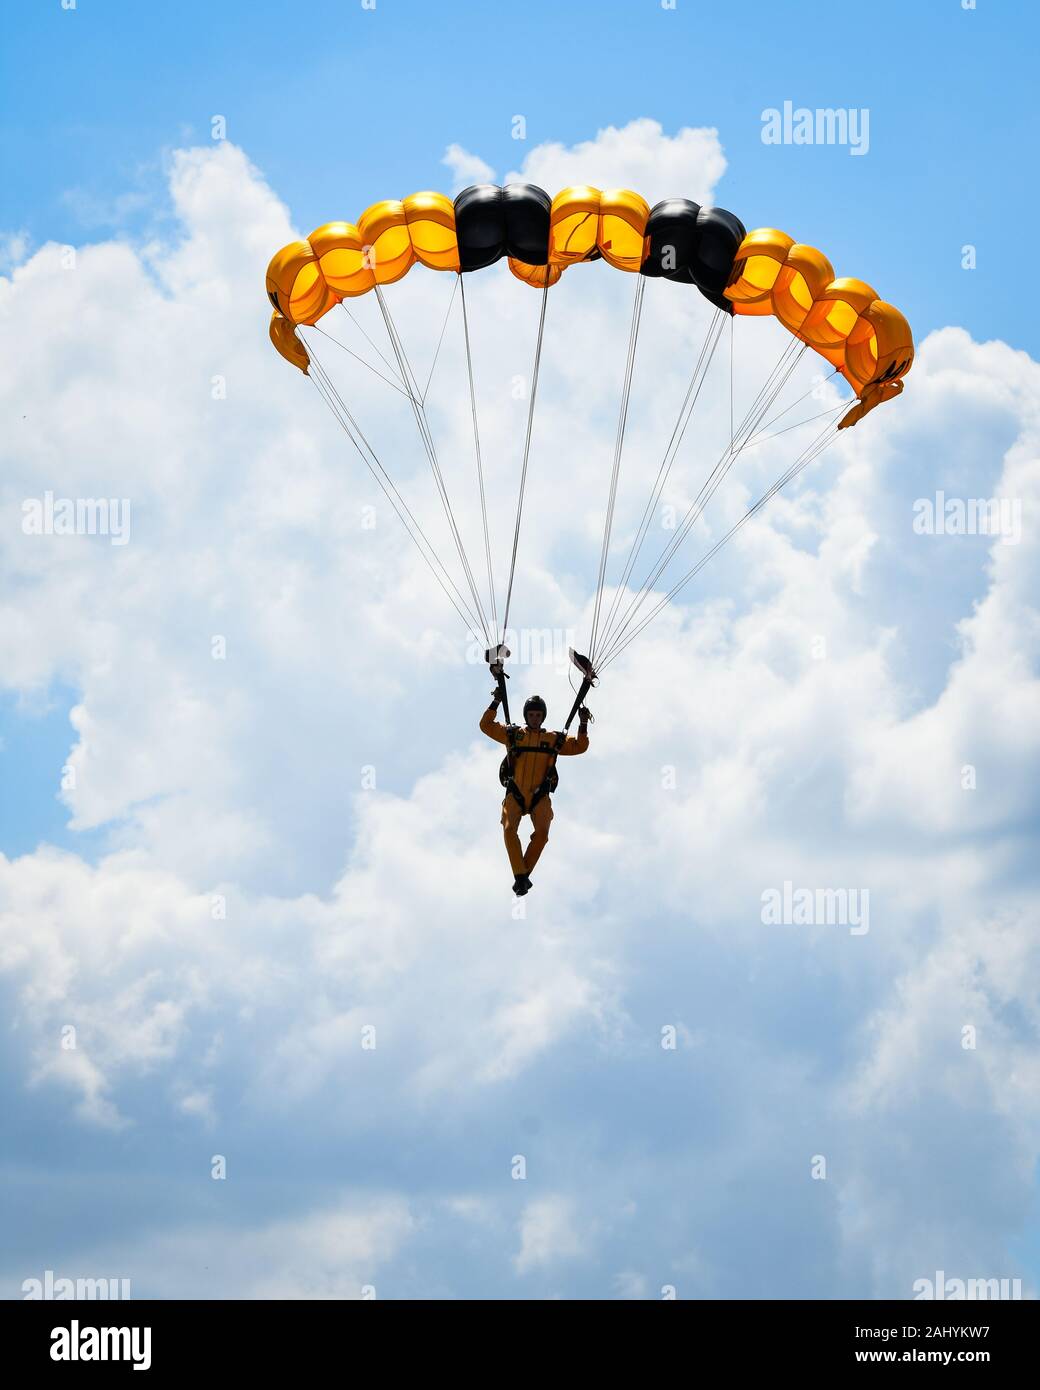 U.S. Army Golden Knights train together during a joint training exercise with other parachute team Soldiers. In addition to the Golden Knights, the teams here for training include: the British Army’s Red Devils, the U.S. Army Special Operations Command Black Daggers, the U.S. Navy Leap Frogs, the U.S. Air Force Wings of Blue, the U.S. Special Operations Command Para Commandos, and Fort Benning’s Silver Wings. (U.S. Army photo by Lara Poirrier) Stock Photo